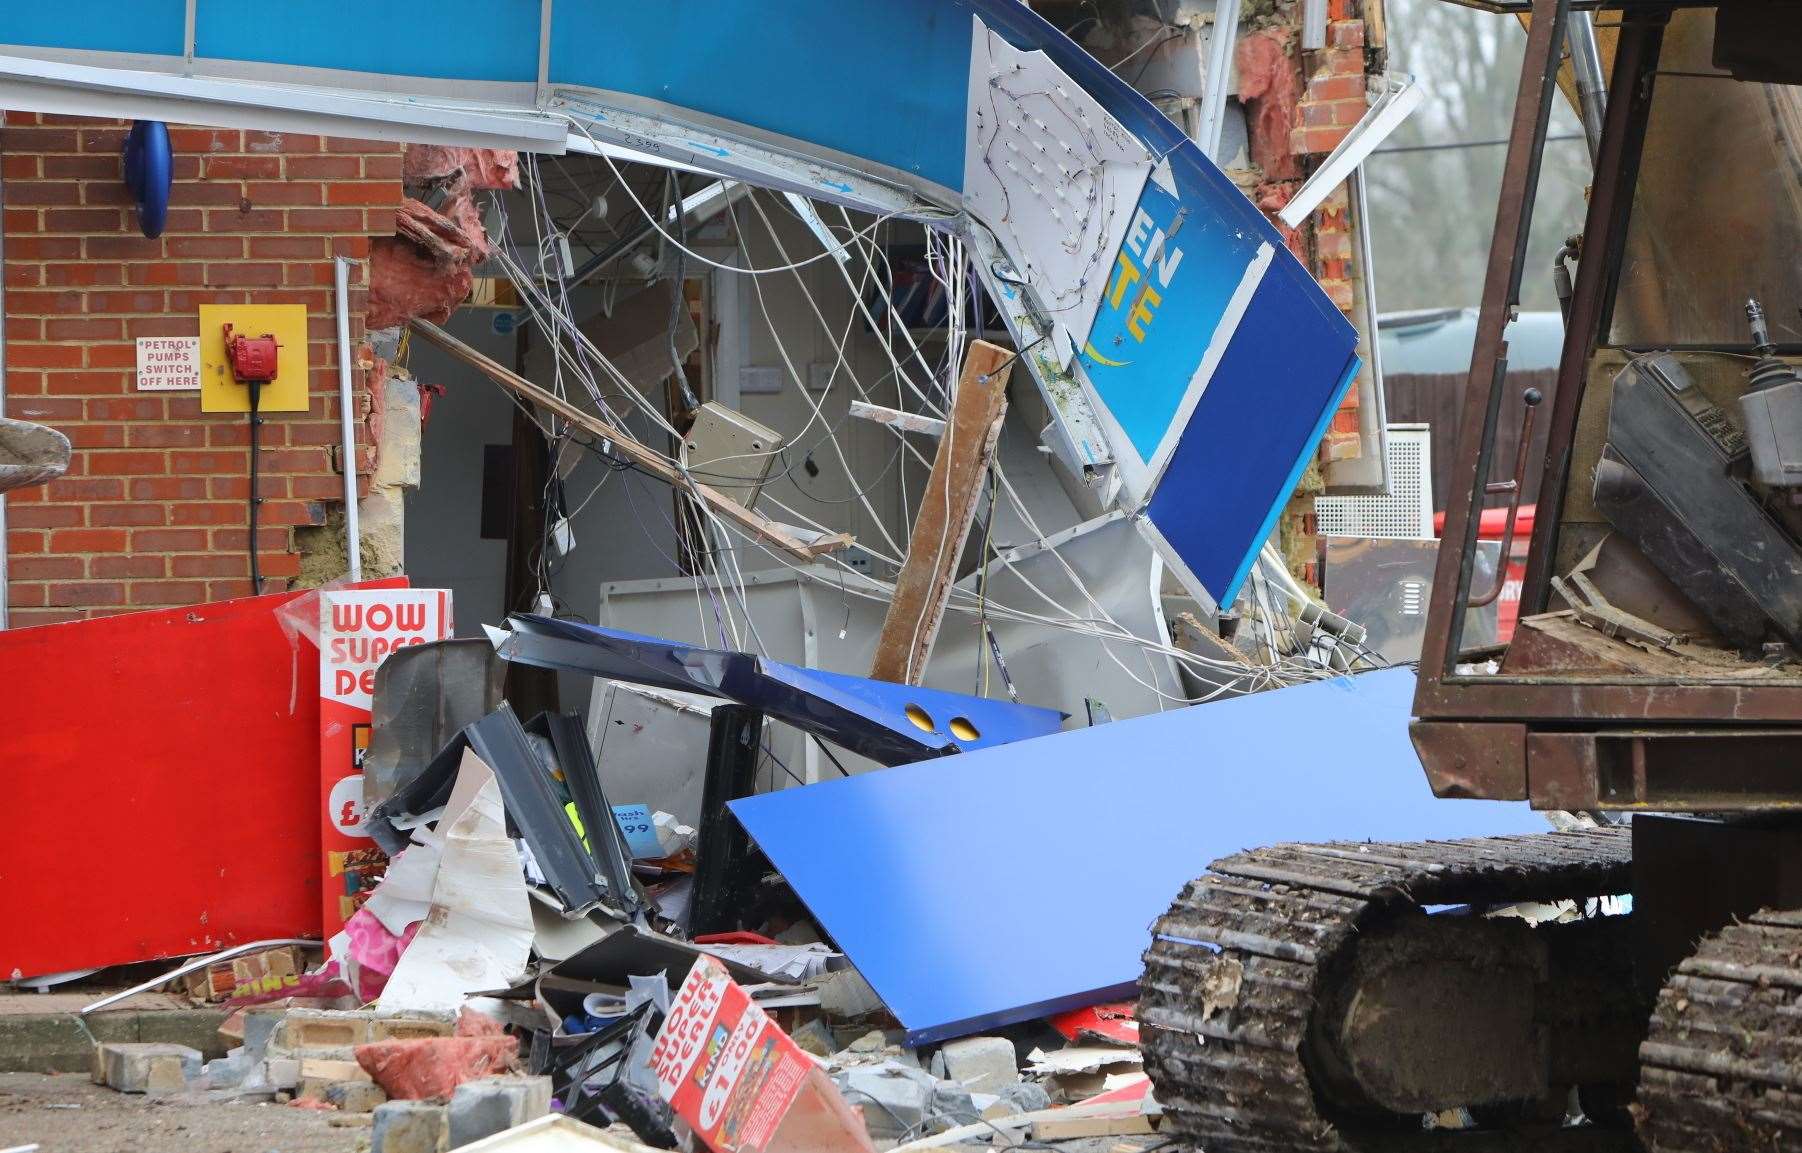 The extent of the damage to a petrol station in Staplehurst, after a digger ripped a cash machine from the wall